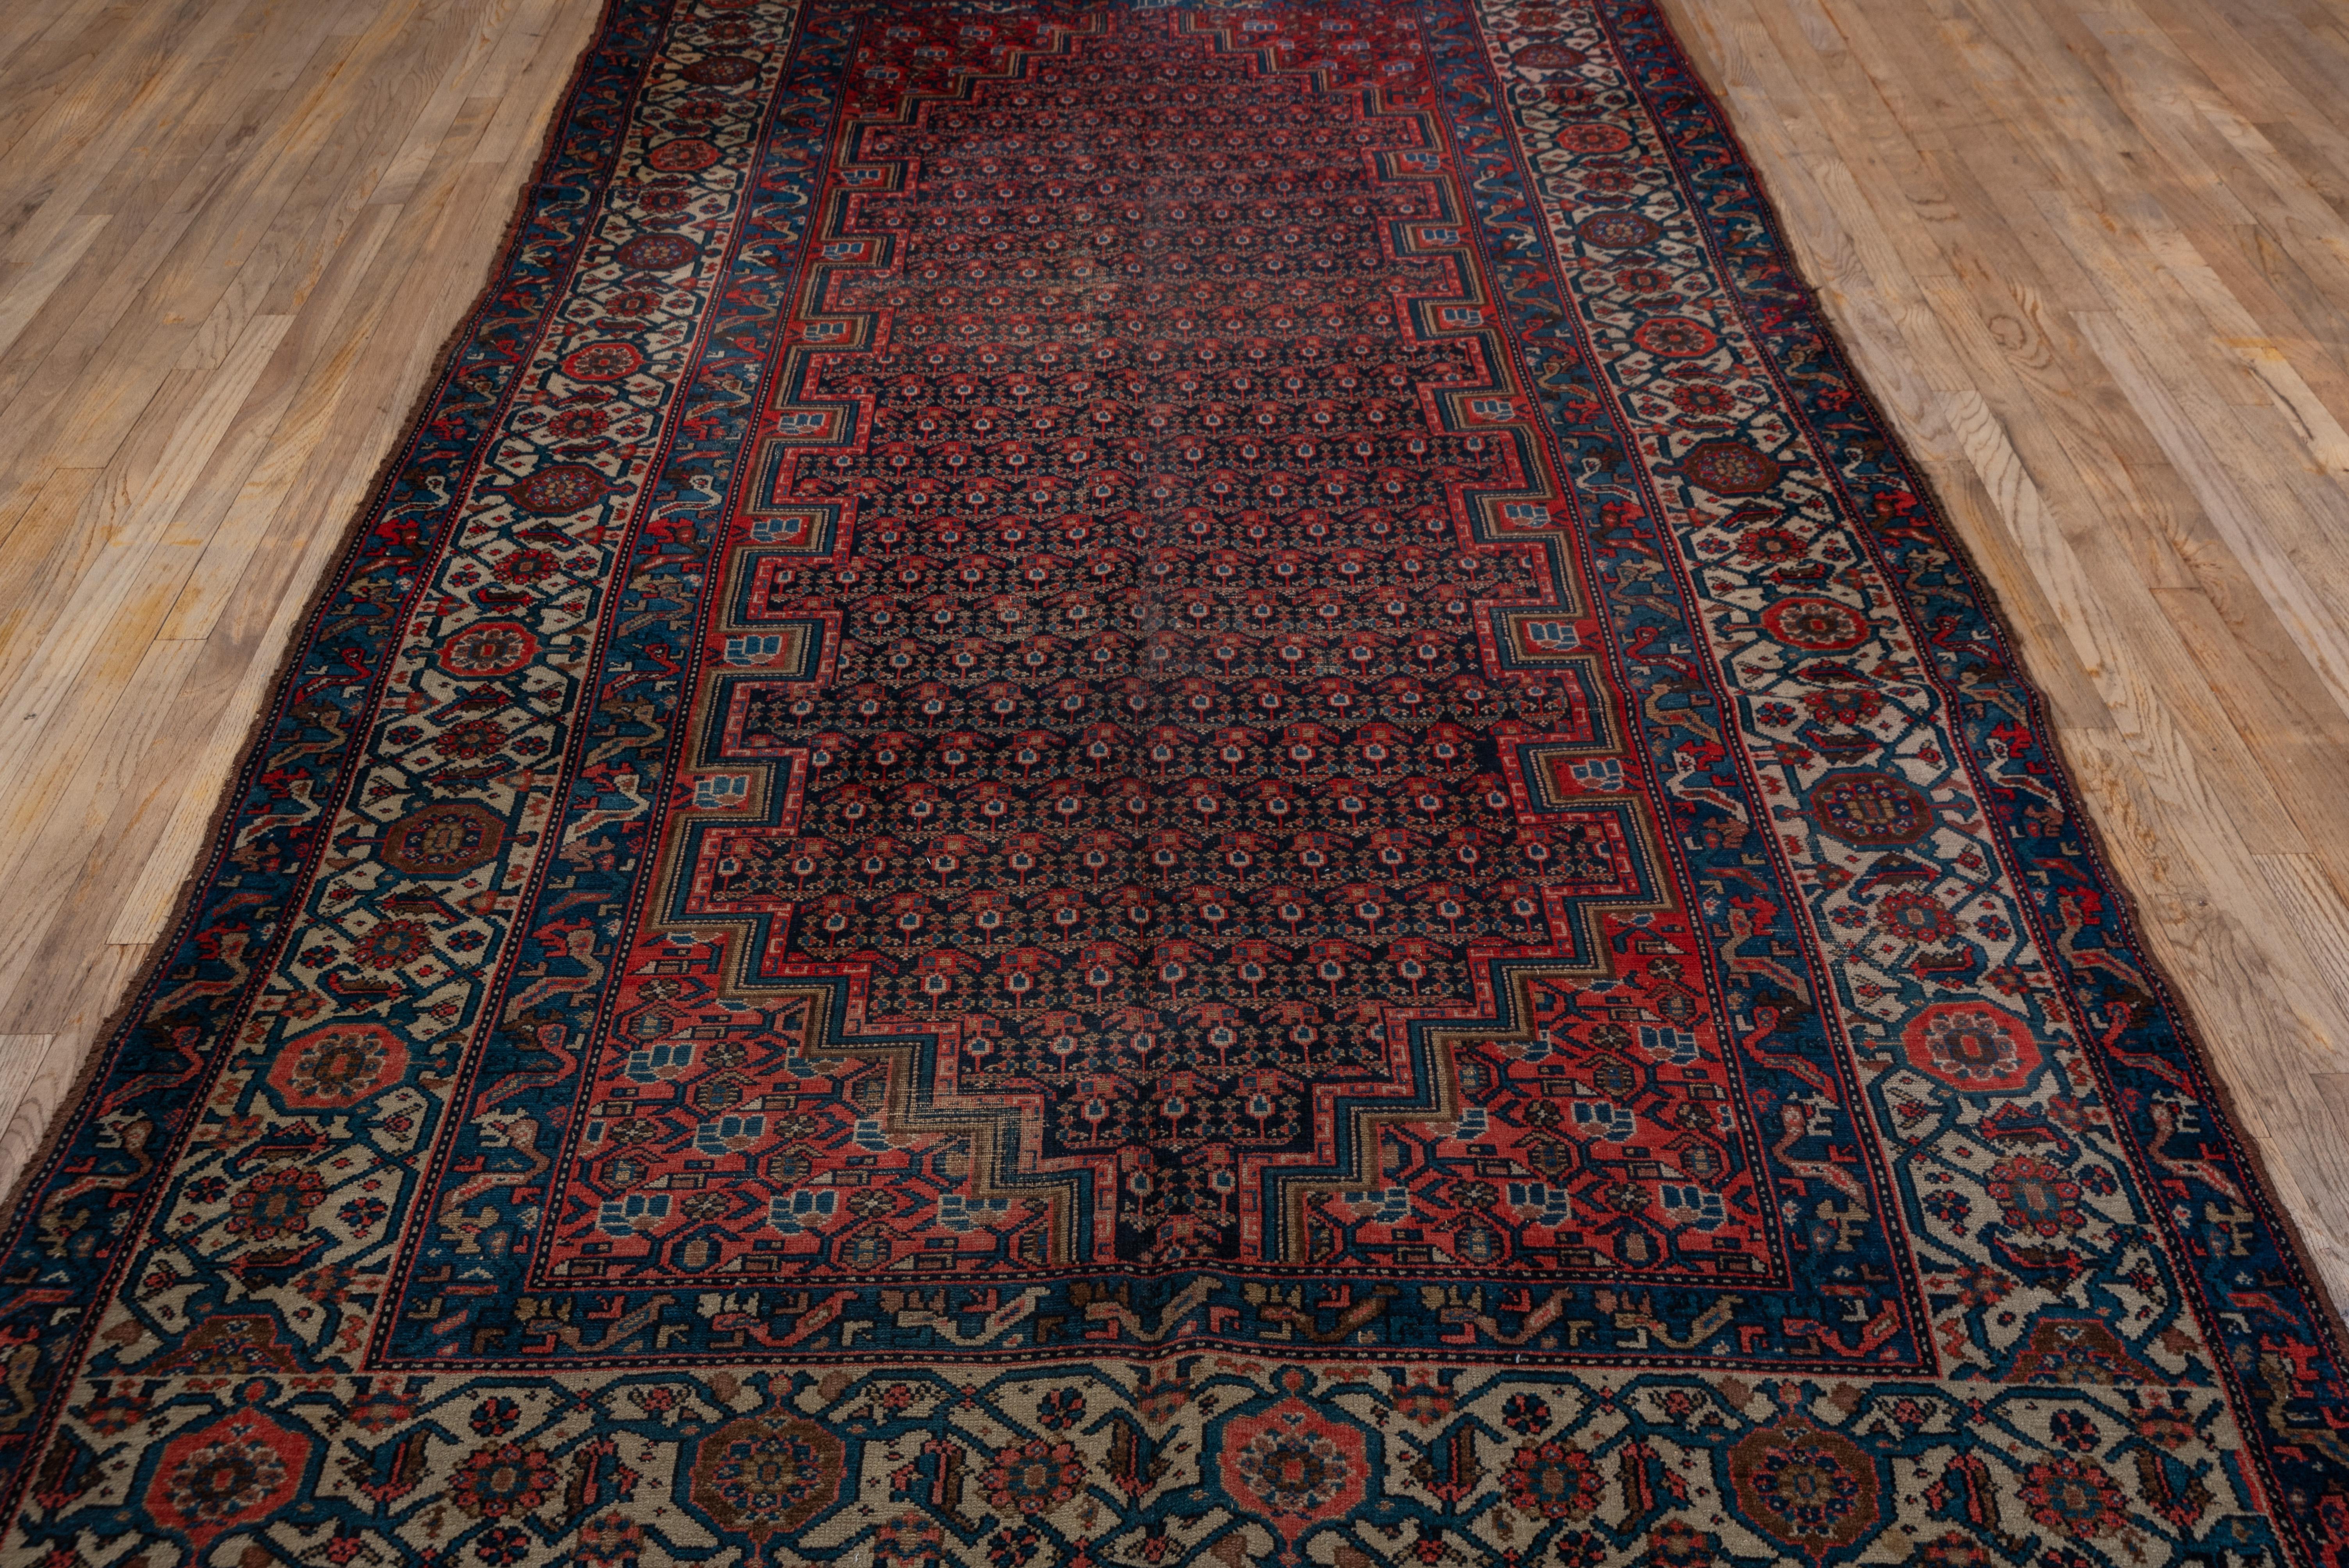 Hand-Knotted Shabby Chic Antique Persian Malayer Gallery Rug, Navy & Light Red Paisley Field